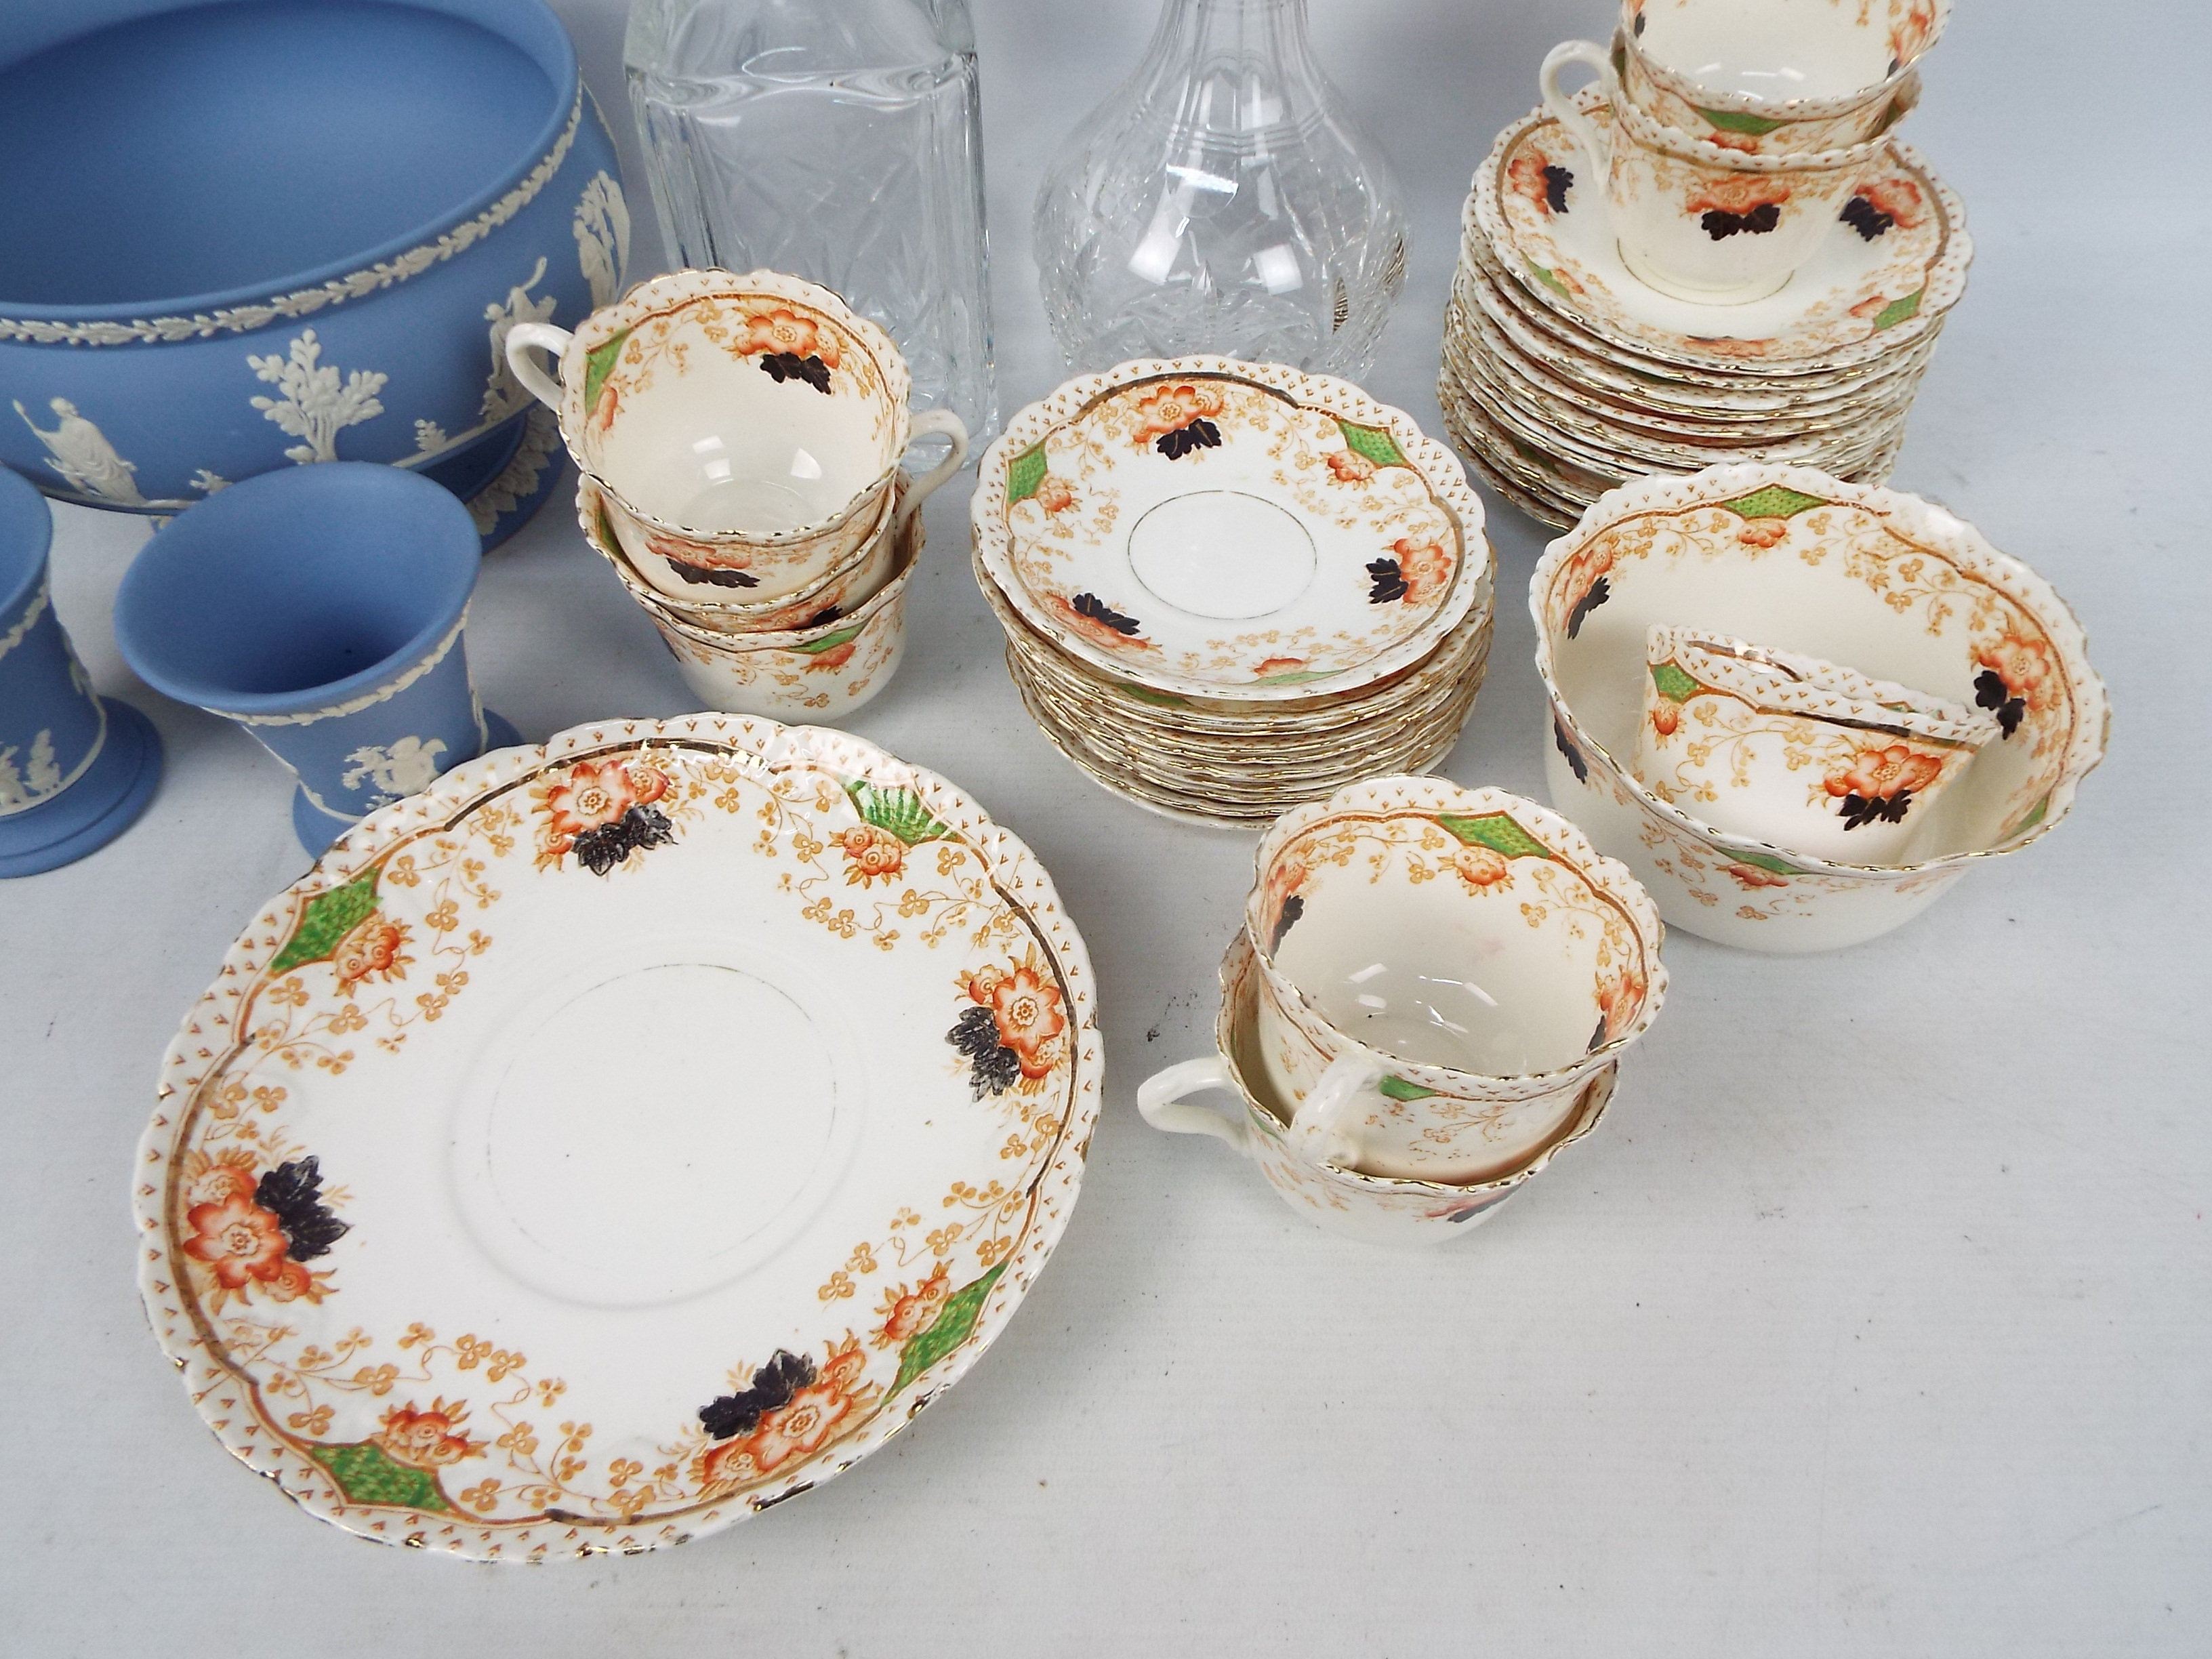 Lot to include a Wedgwood Jasperware pedestal fruit bowl and pair of vases, - Image 3 of 4